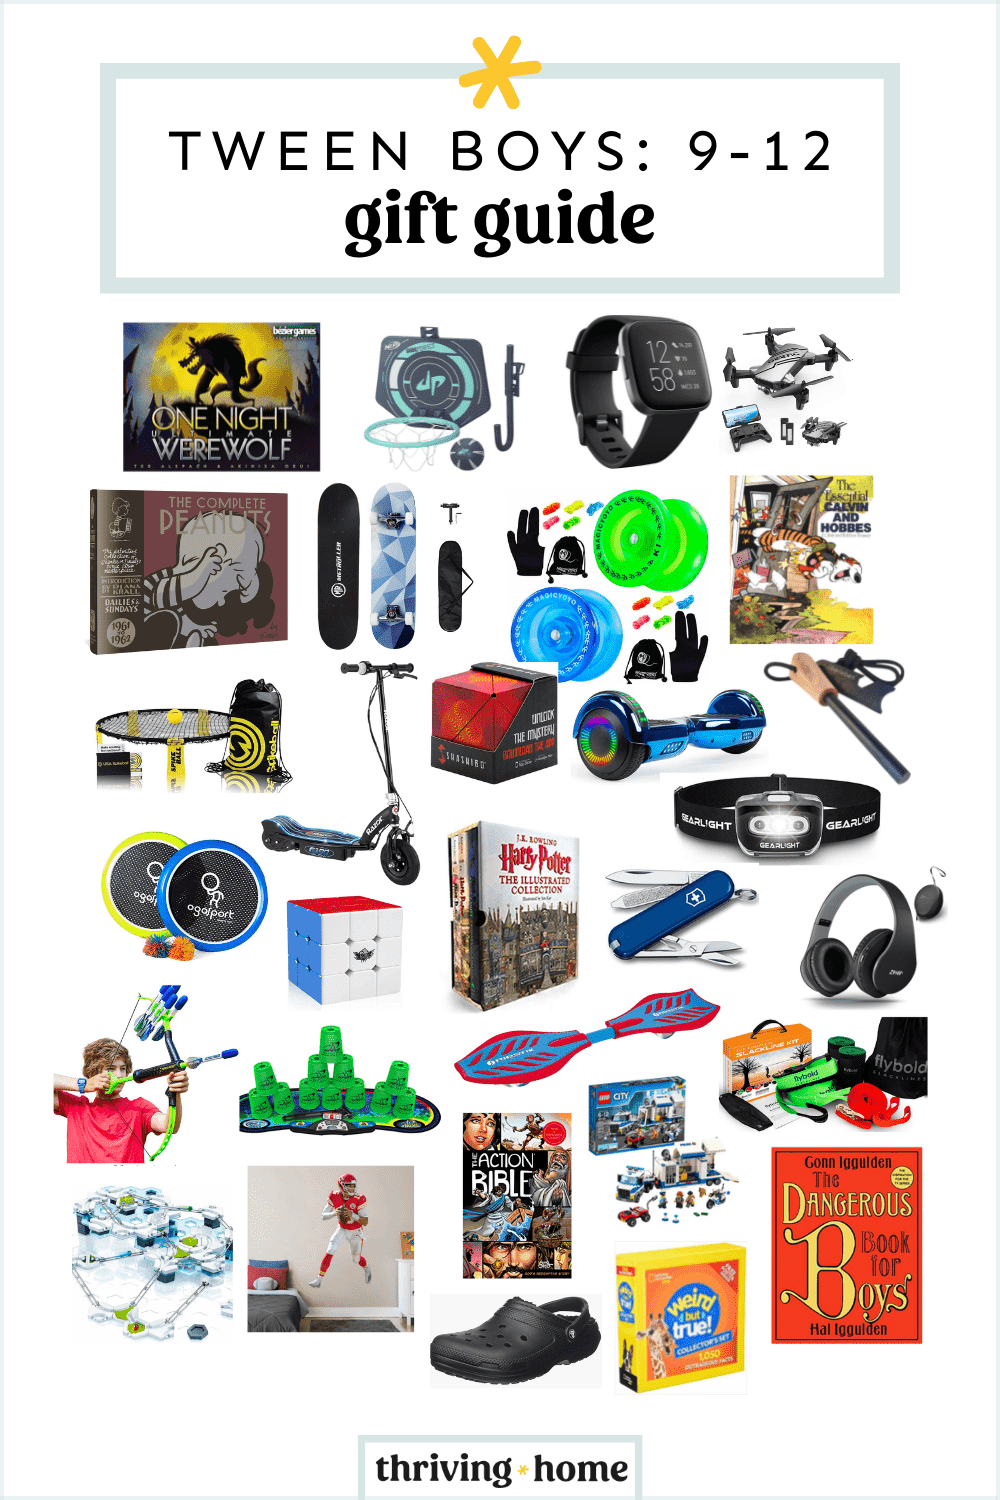 Gift Ideas for 10 to 13 Year Old Boys - Frugal Fun For Boys and Girls